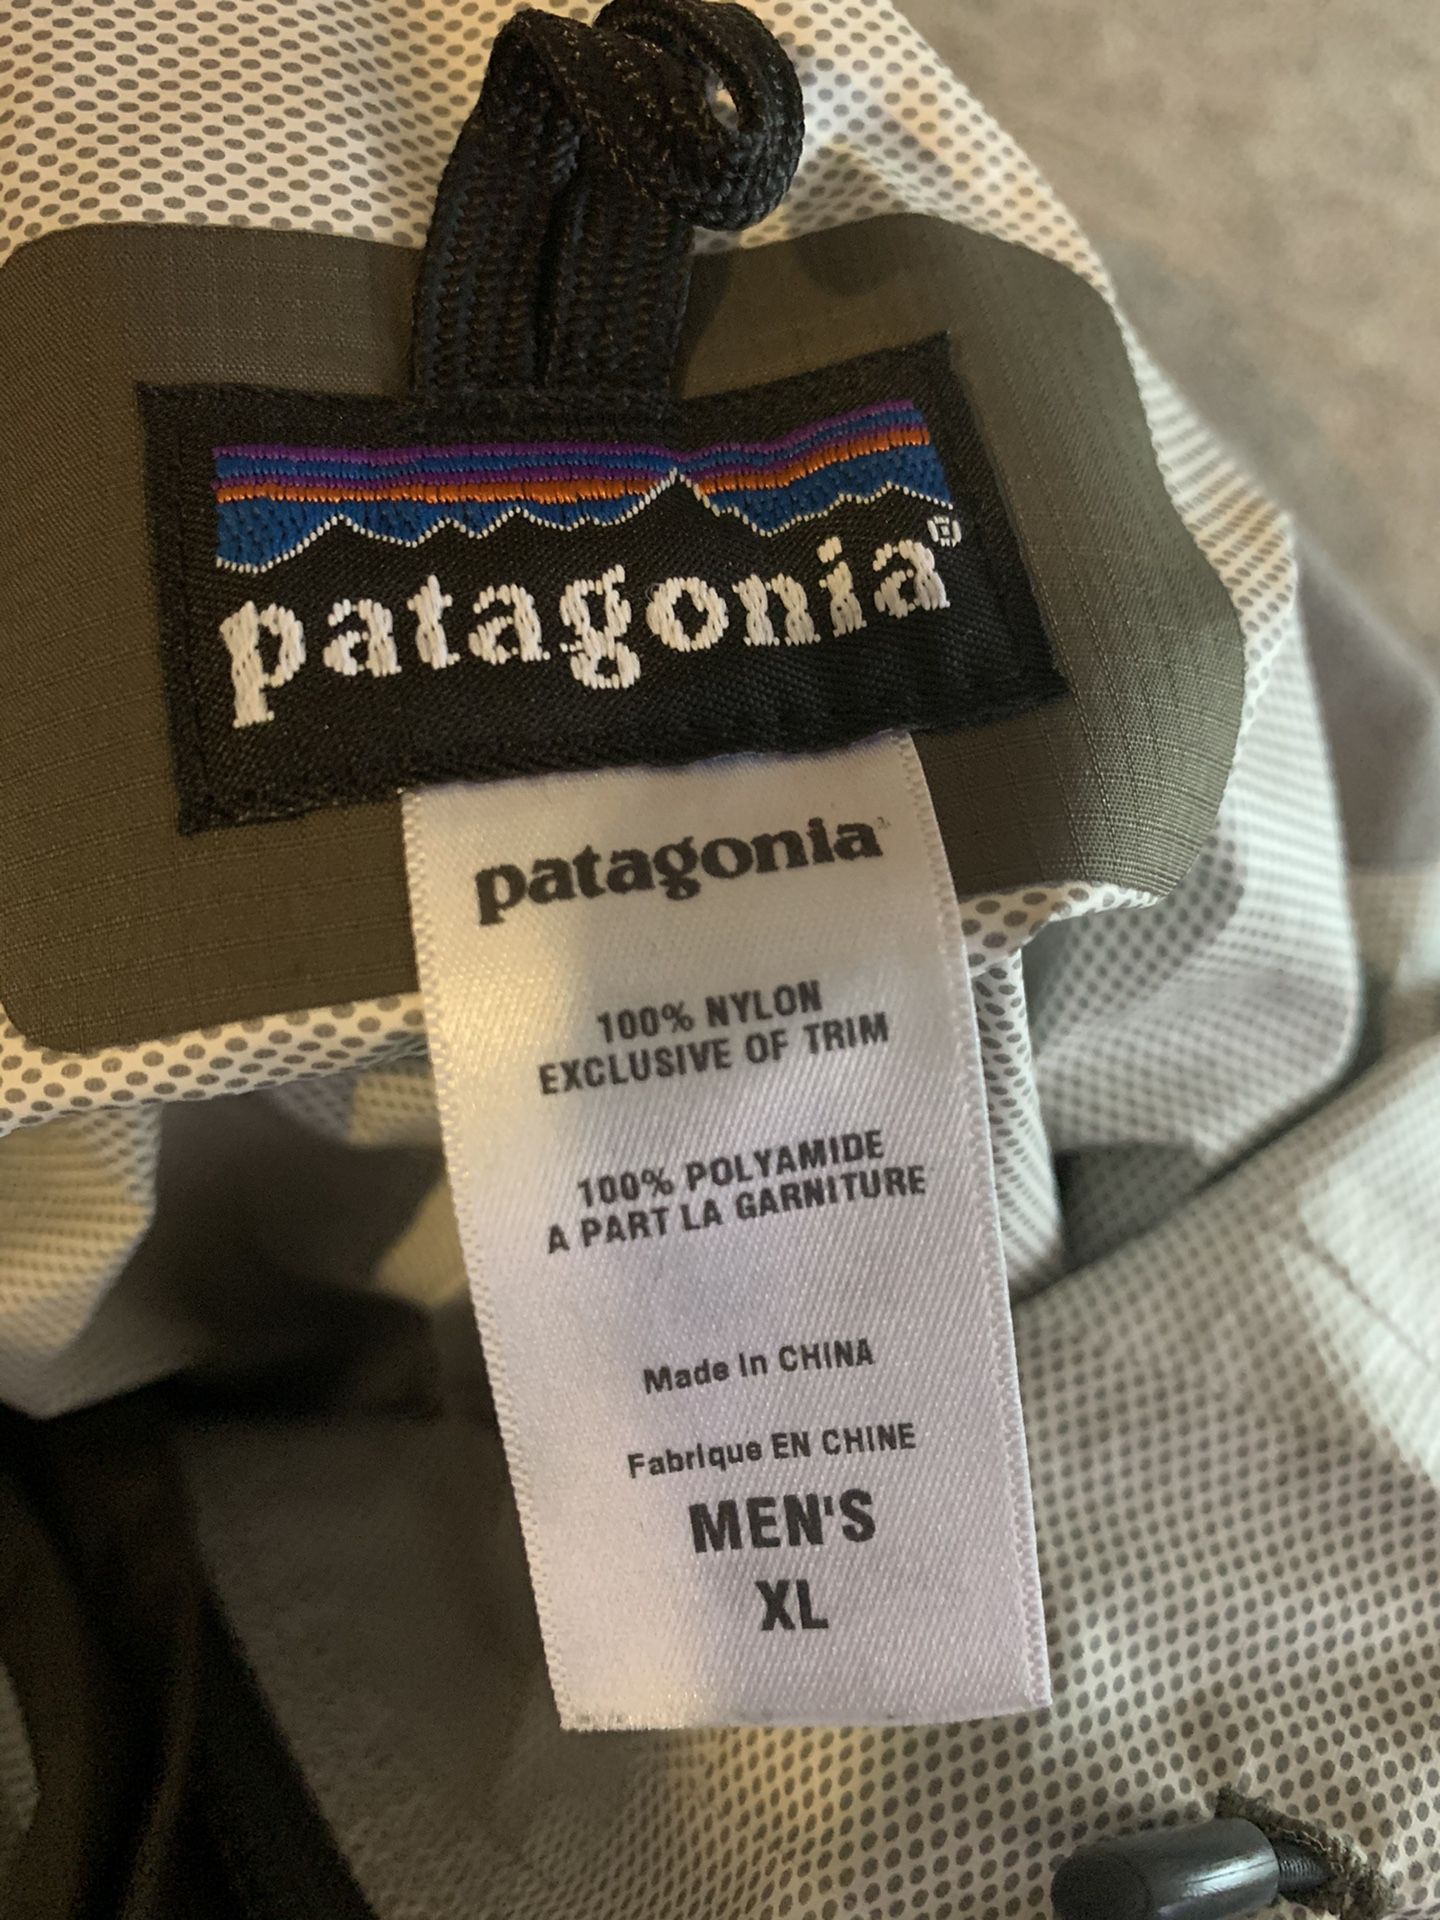 Brand new Patagonia raincoat/windbreaker XL jacket Retails for $129 will sell for $50!